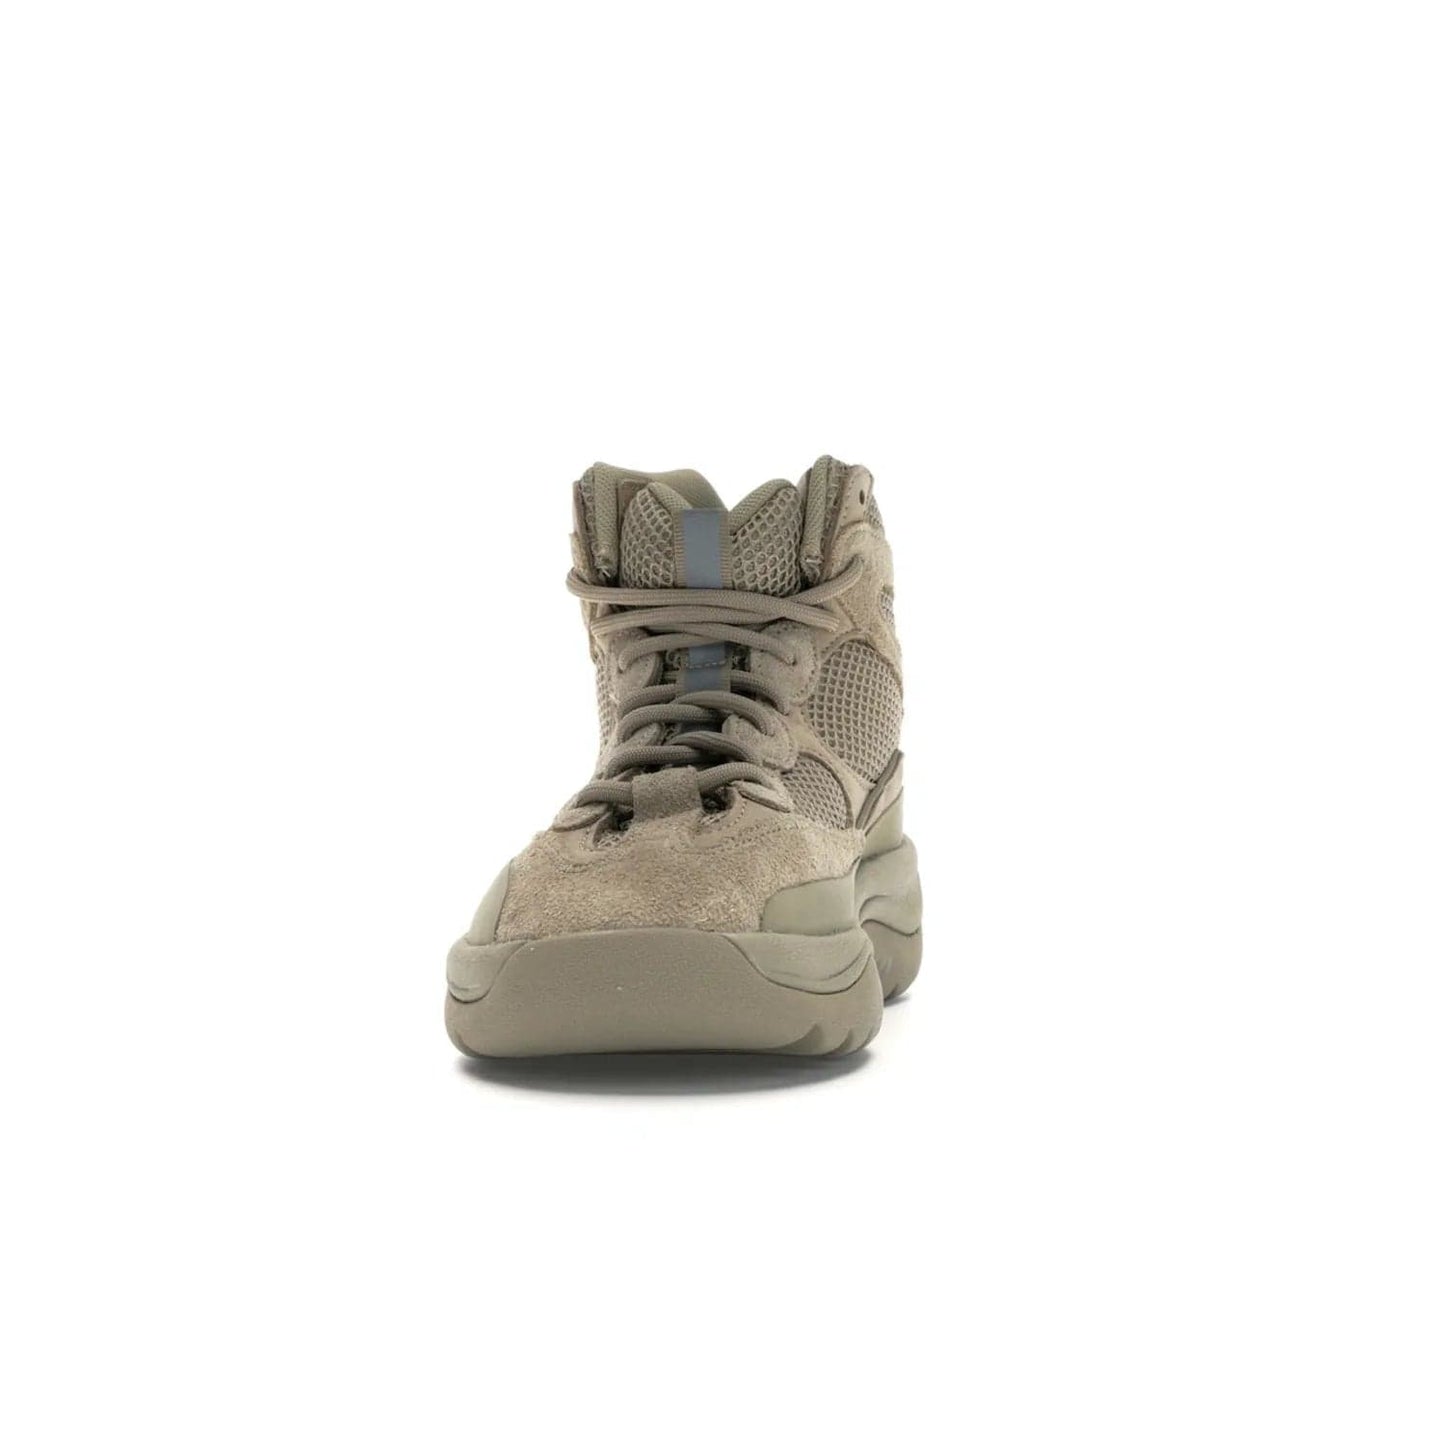 adidas Yeezy Desert Boot Rock - Image 11 - Only at www.BallersClubKickz.com - #
This season, make a fashion statement with the adidas Yeezy Desert Boot Rock. Nubuck and suede upper offers tonal style while the grooved sole provides traction and stability. Get yours in April 2019.